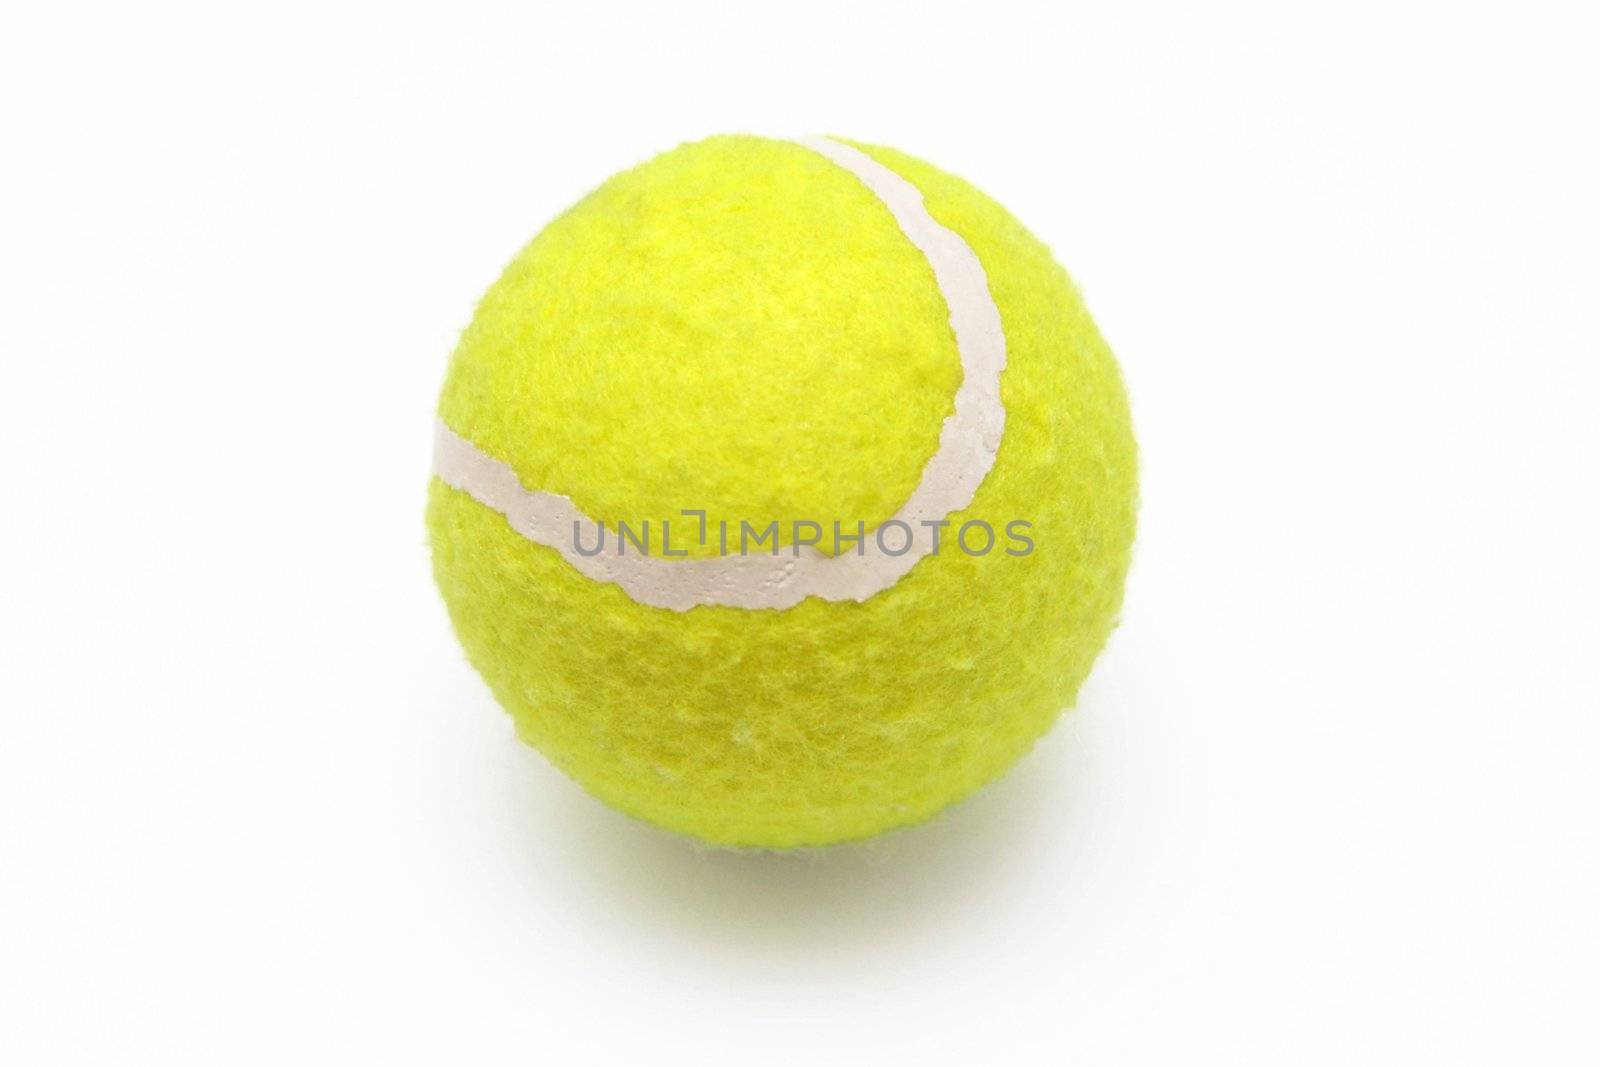 A tennis ball on the white background